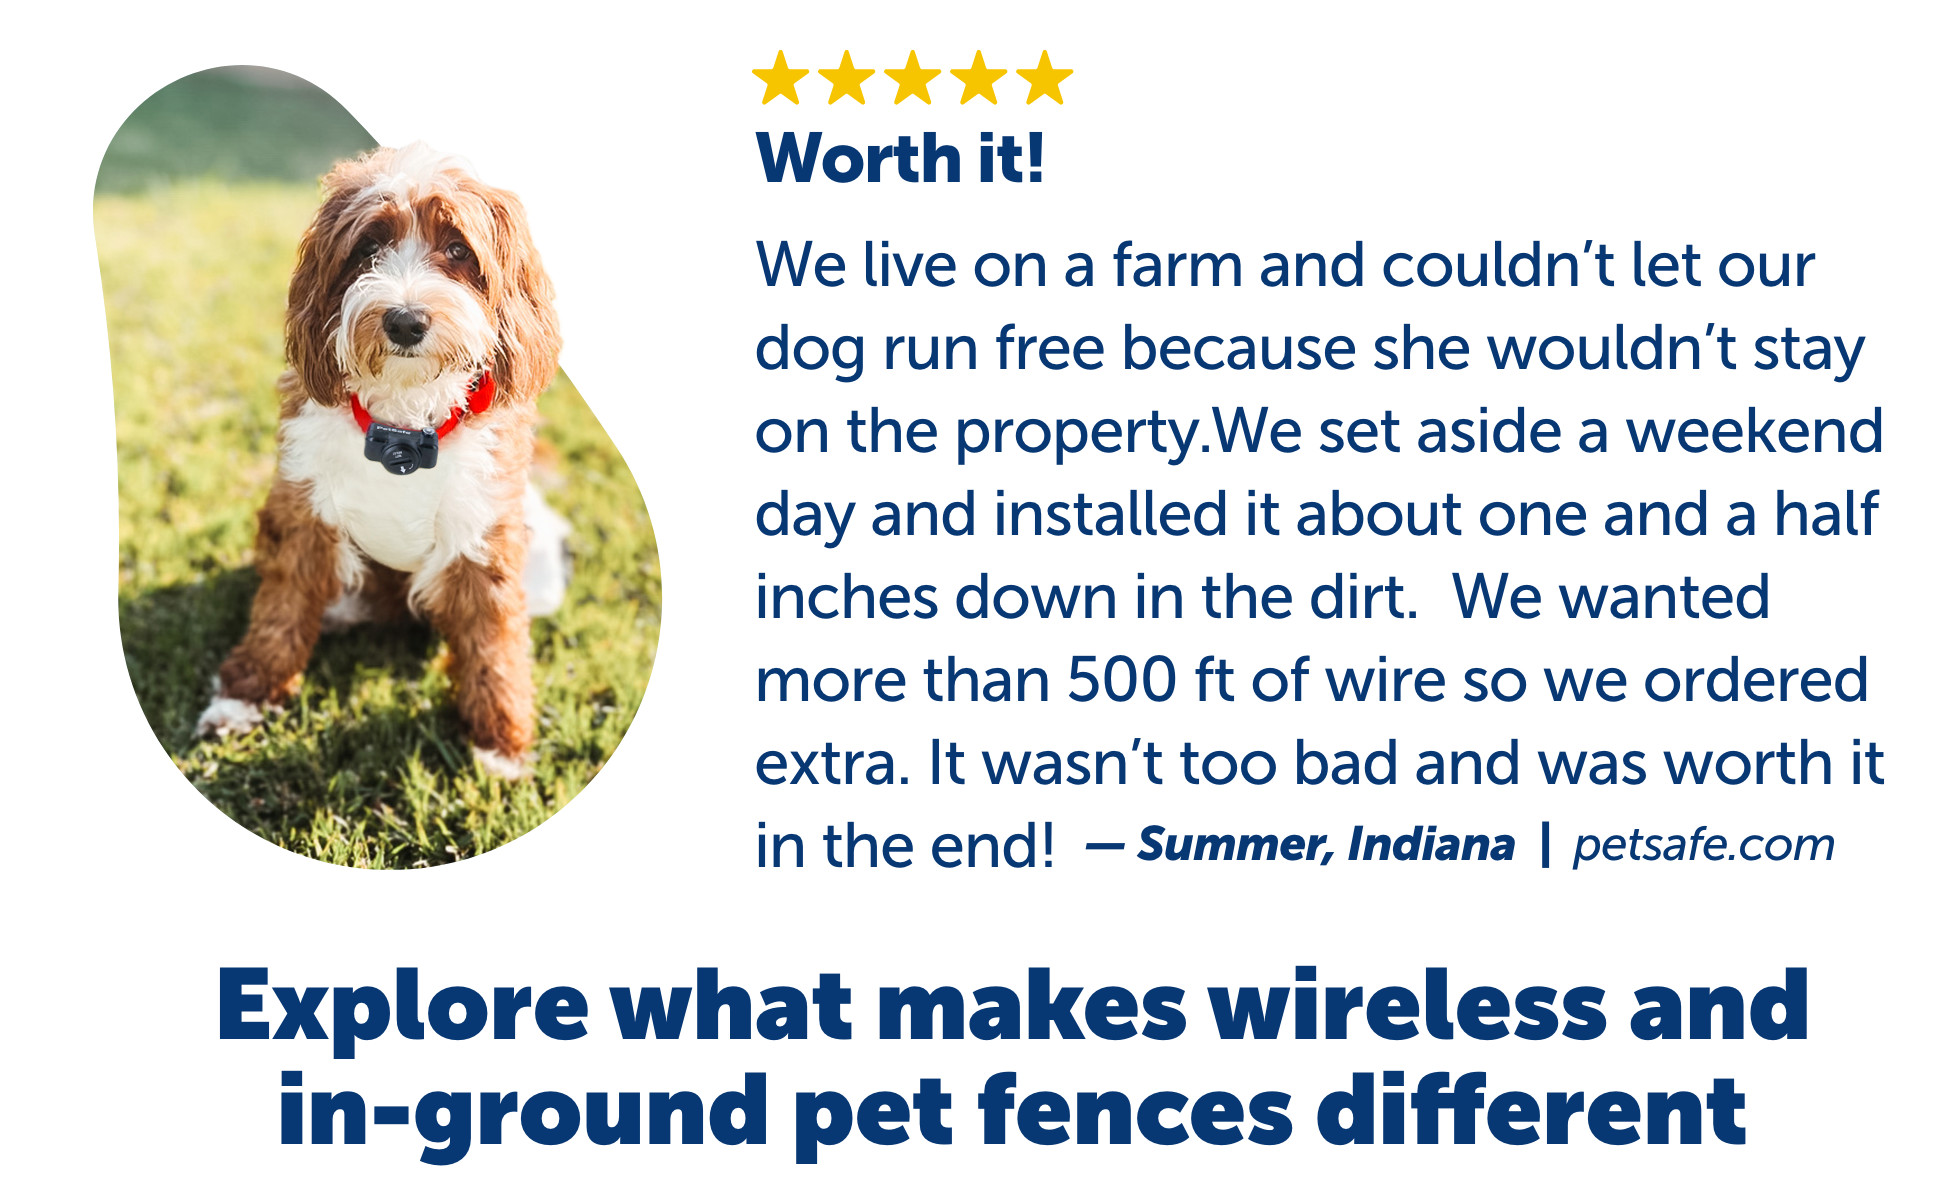 PetSafe® Rechargeable In-Ground Fence System  A+ Underground Pet Fencing,  Inc. Illinois Dog Fence Dealer & Store